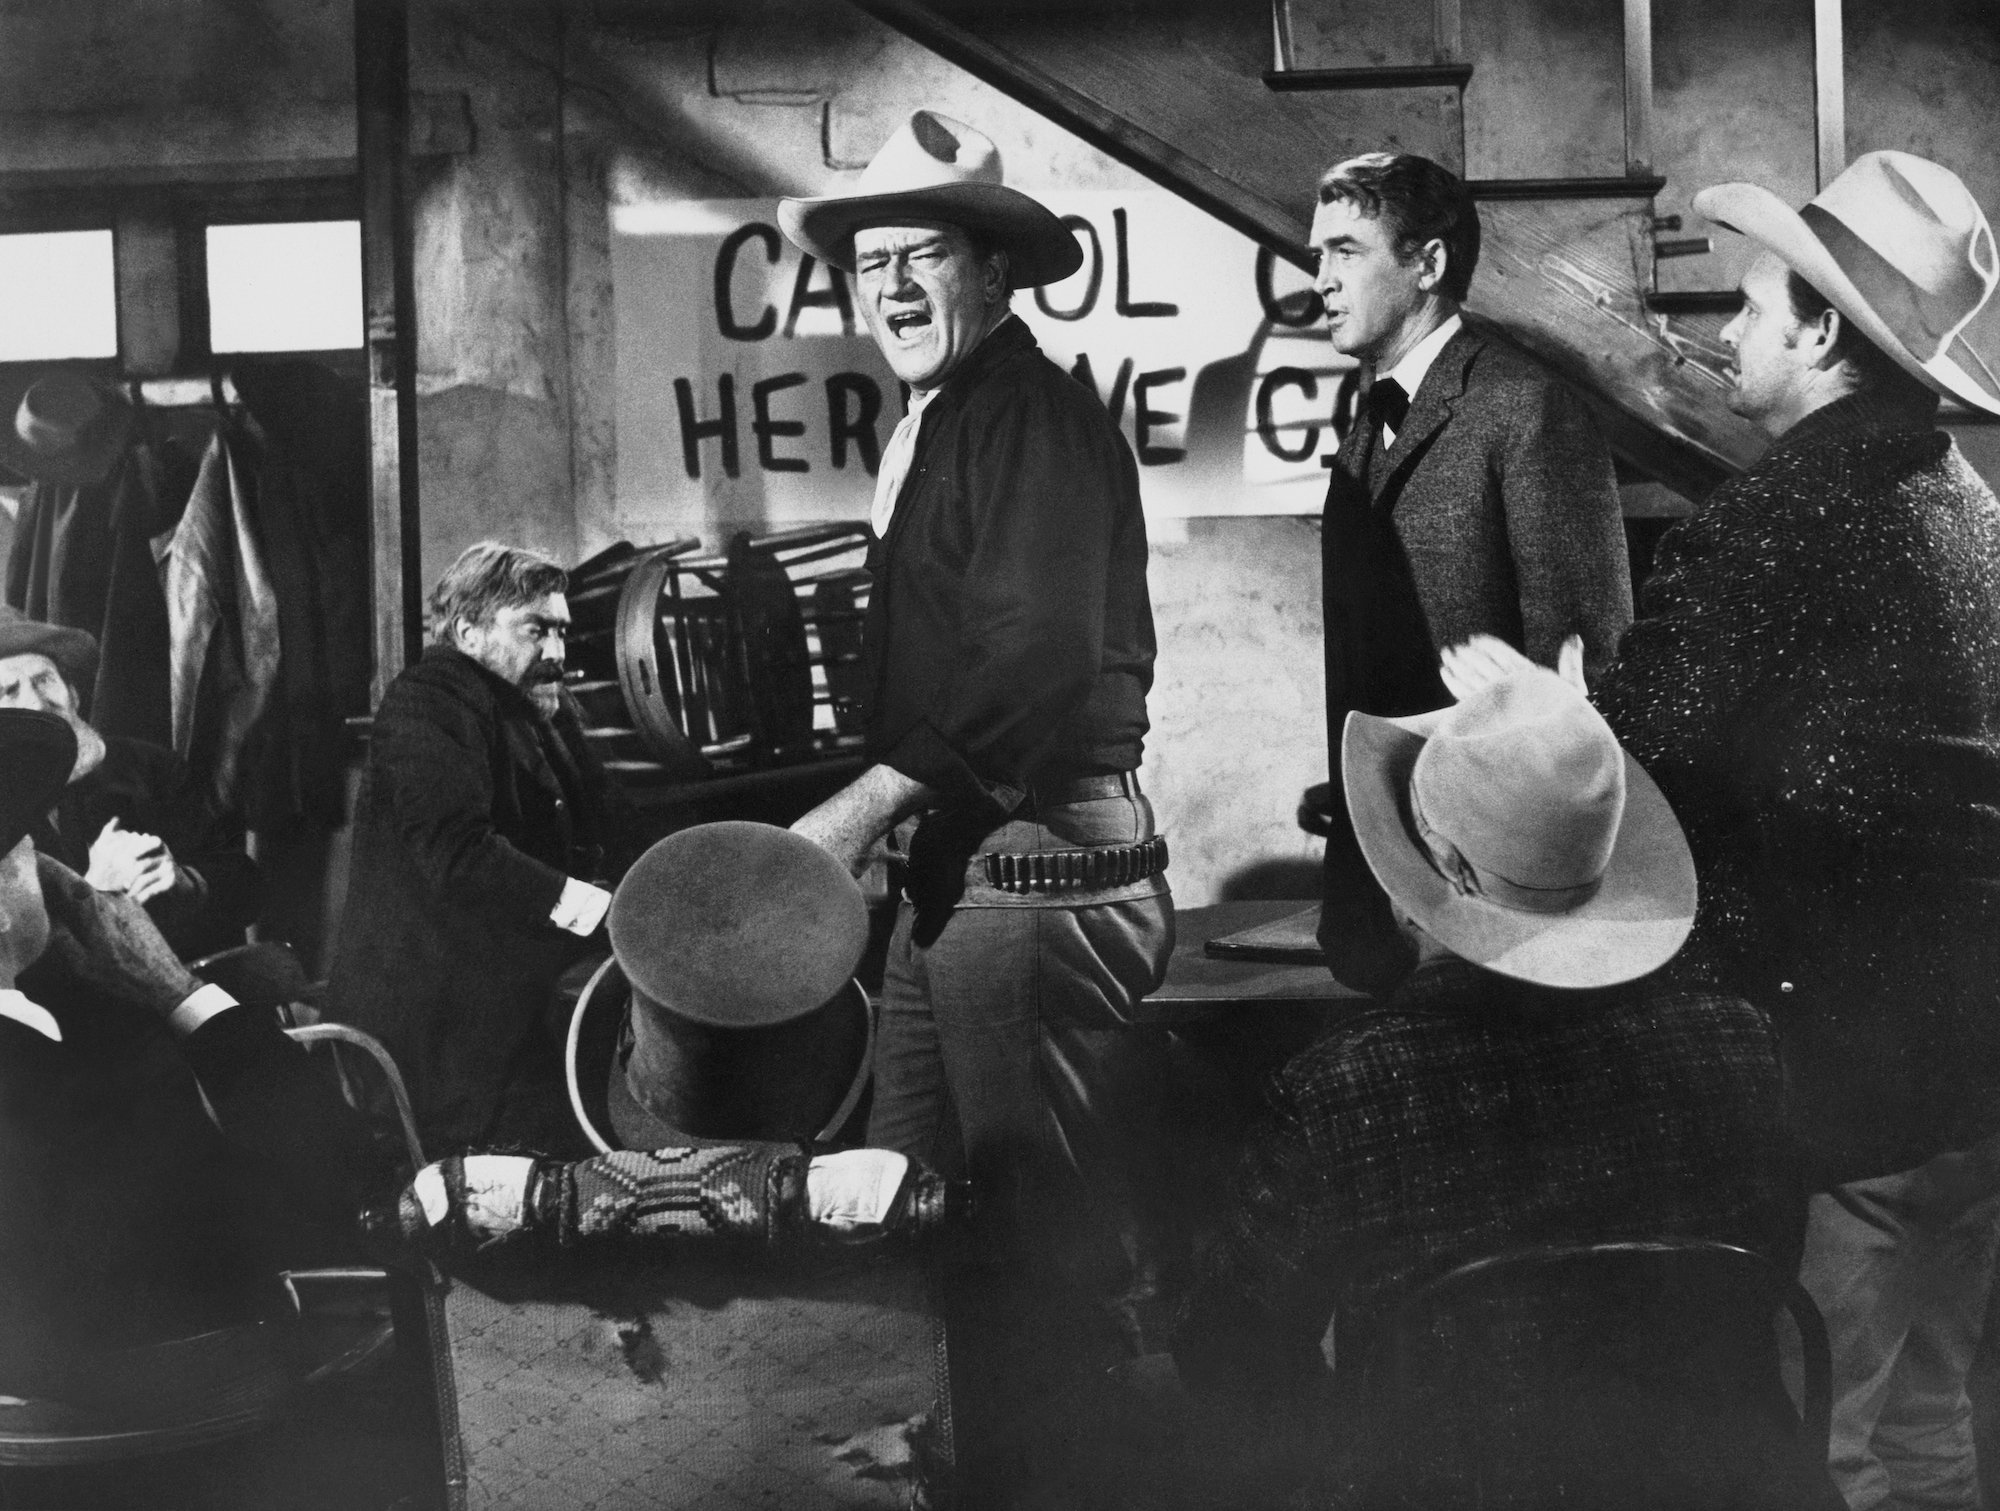 John Wayne speaks at a town hall in 'The Man Who Shot Liberty Valance' in a smaller role than the short story